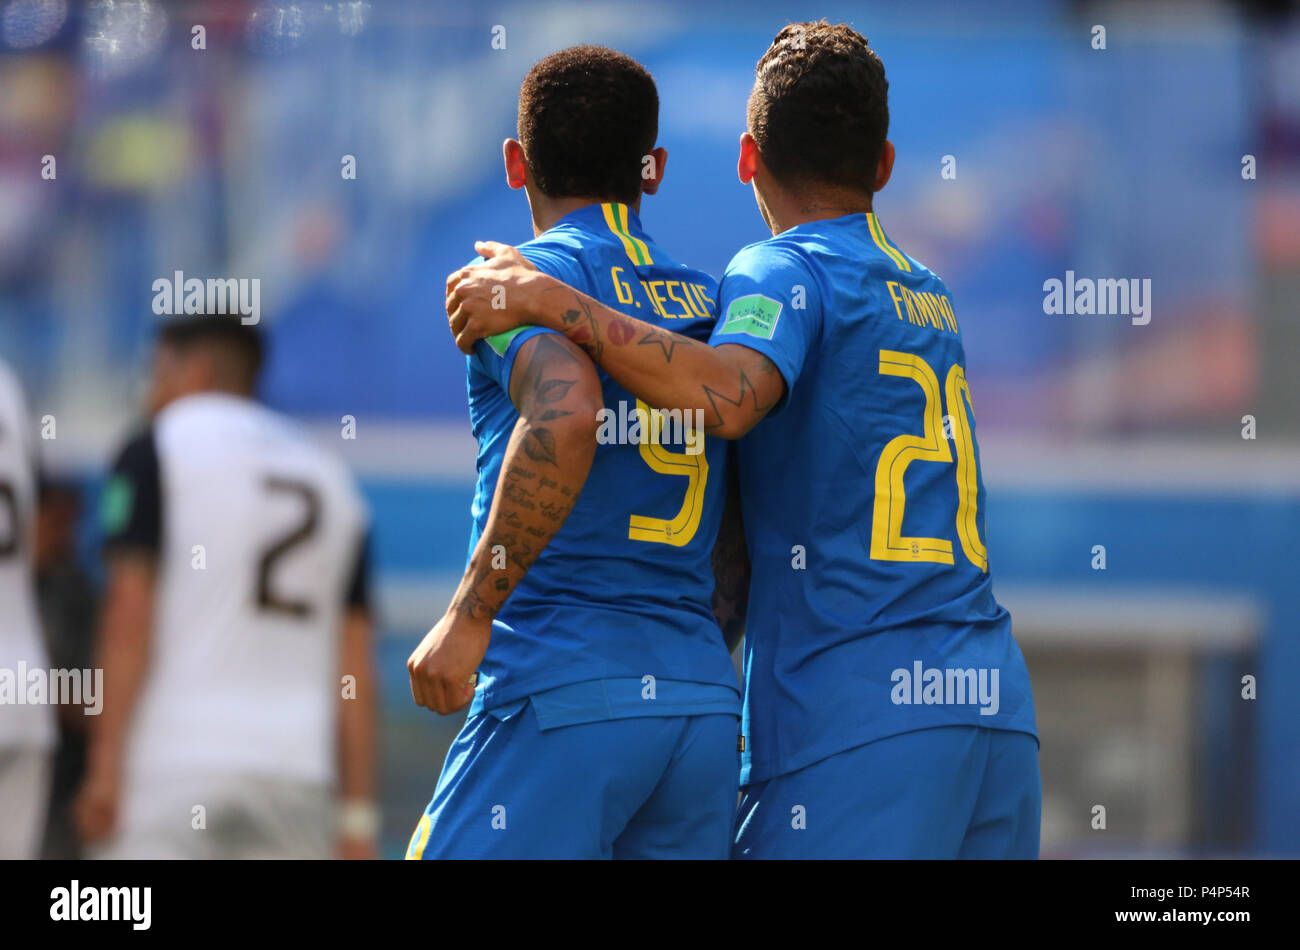 Saint Petersburg, Russia. 22nd June 2018. GABRIEL JESUS AND ROBERTO FIRMINO  in action during the Fifa World Cup Russia 2018, Group E, football match between BRAZIL V COSTARICA  in Saint Petersburg Stadium. Credit: marco iacobucci/Alamy Live News Stock Photo